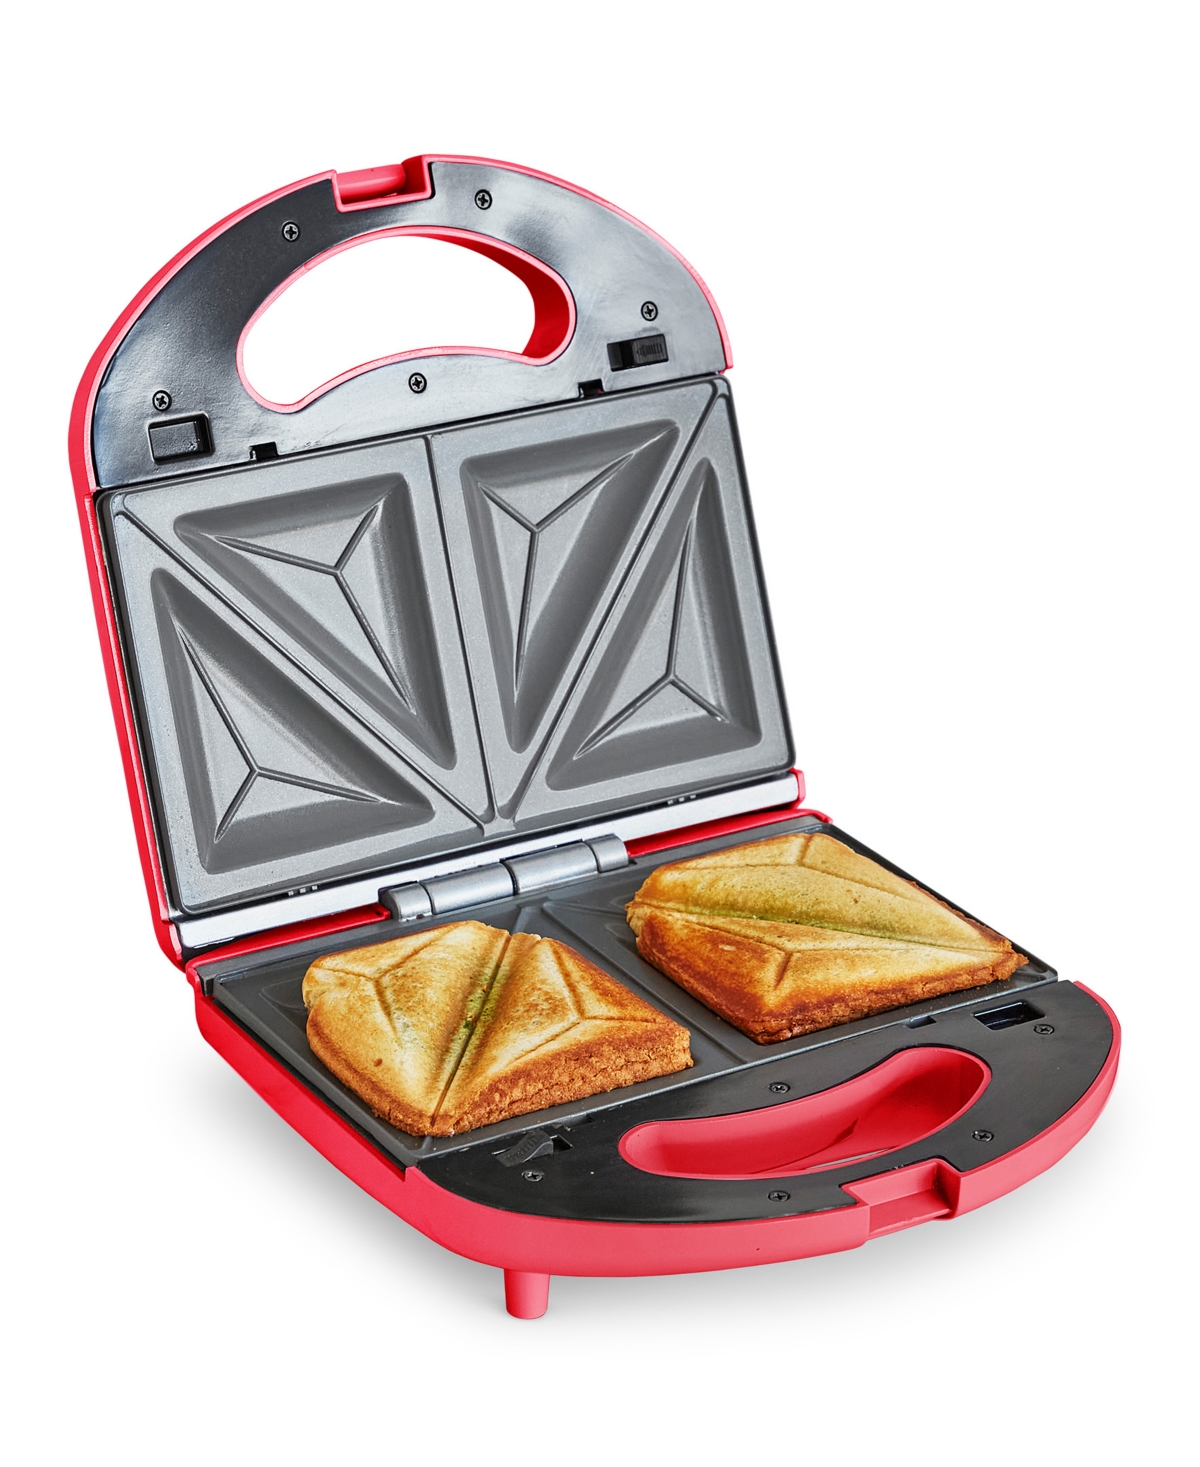 Greenlife Electric Sandwich Maker In Red